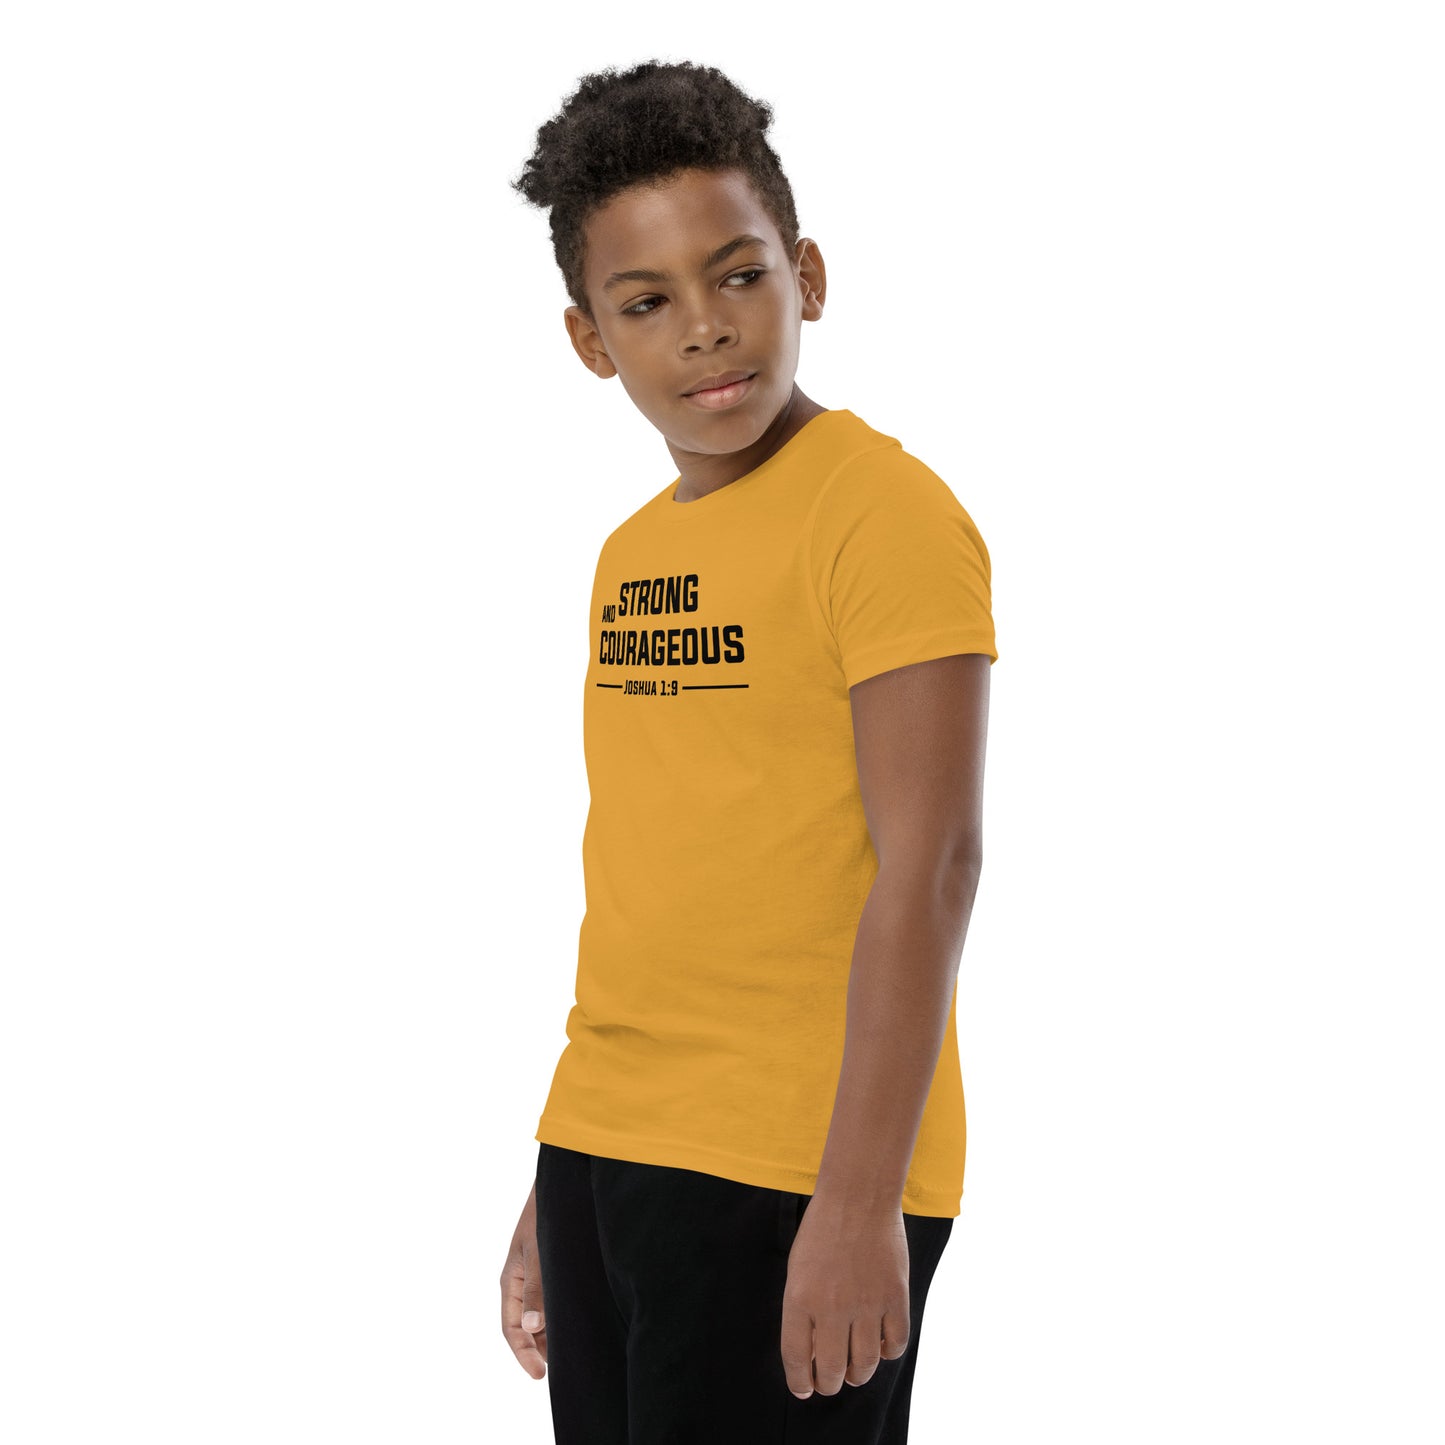 Strong and Courageous Youth T-Shirt